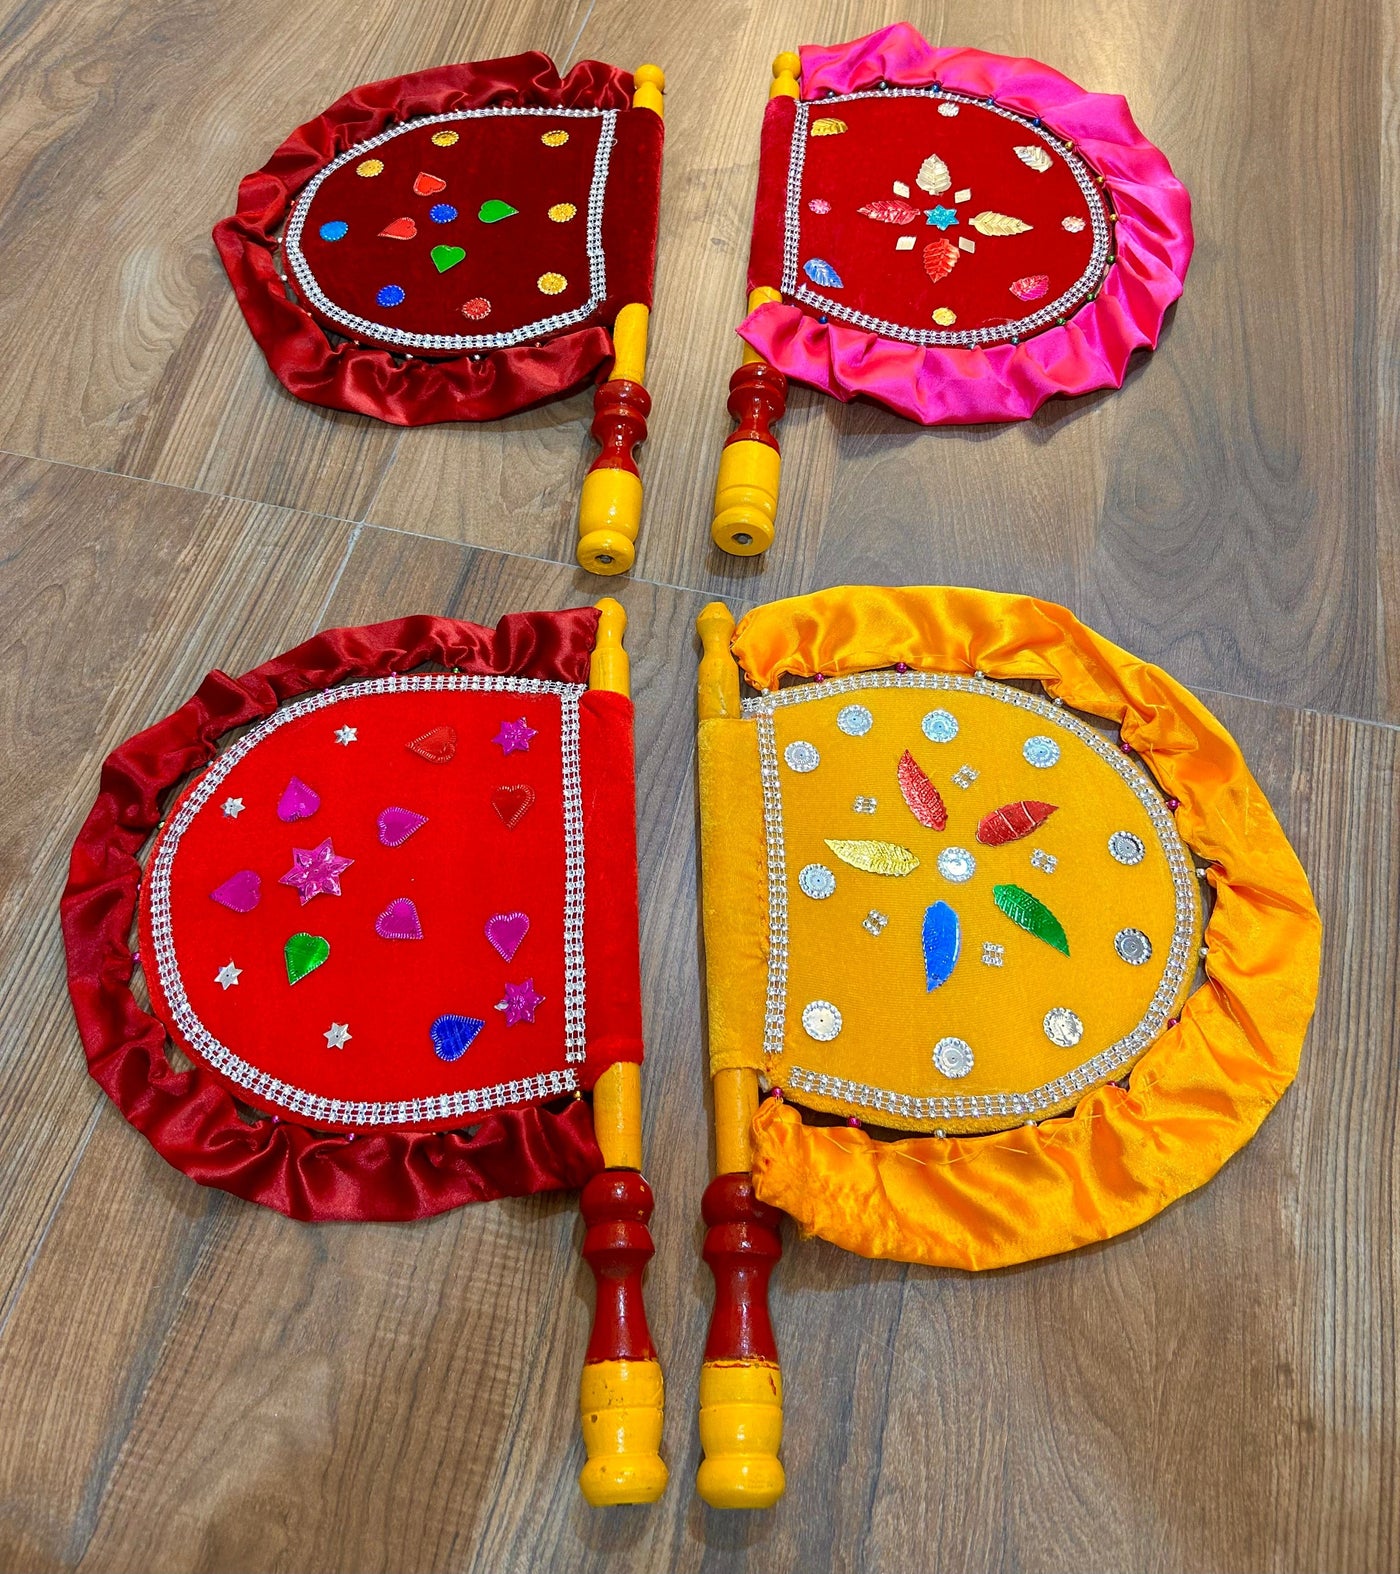 125 Rs each on buying 50+ pcs / WhatsApp at 8619550223 Decorative Velvet Cloth Hand Made Beautiful &Traditional Yellow Color Hand Fan with Wooden Handle Work for Cool Air Home Decor & Travel use / Ideal for wedding and event decoration